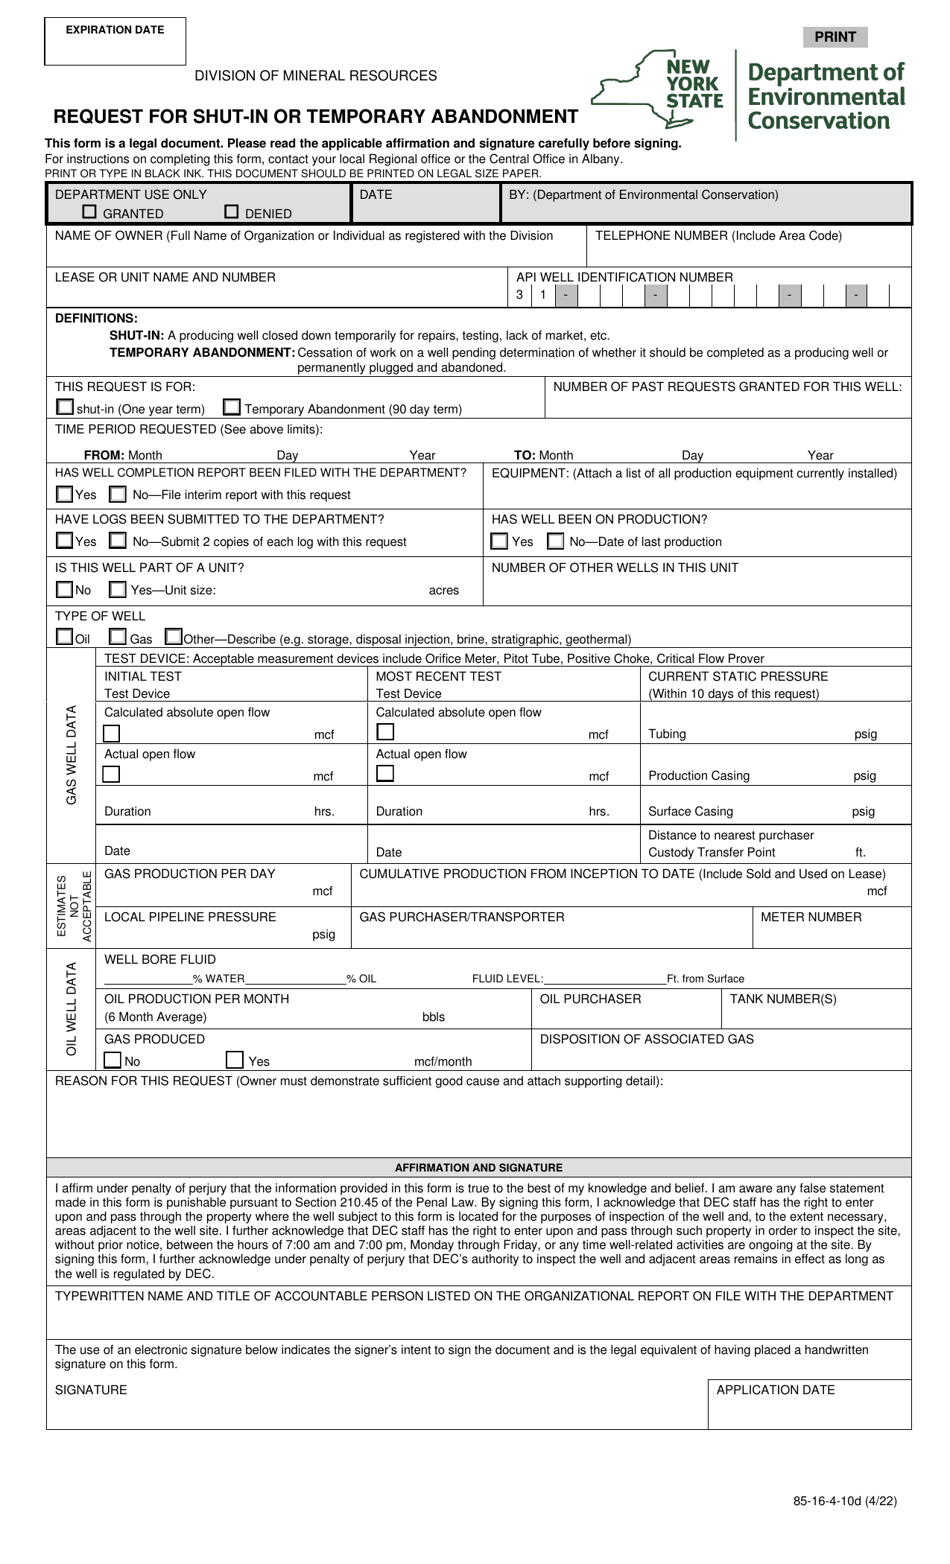 Form 85-16-4-10D Request for Shut-In or Temporary Abandonment - New York, Page 1